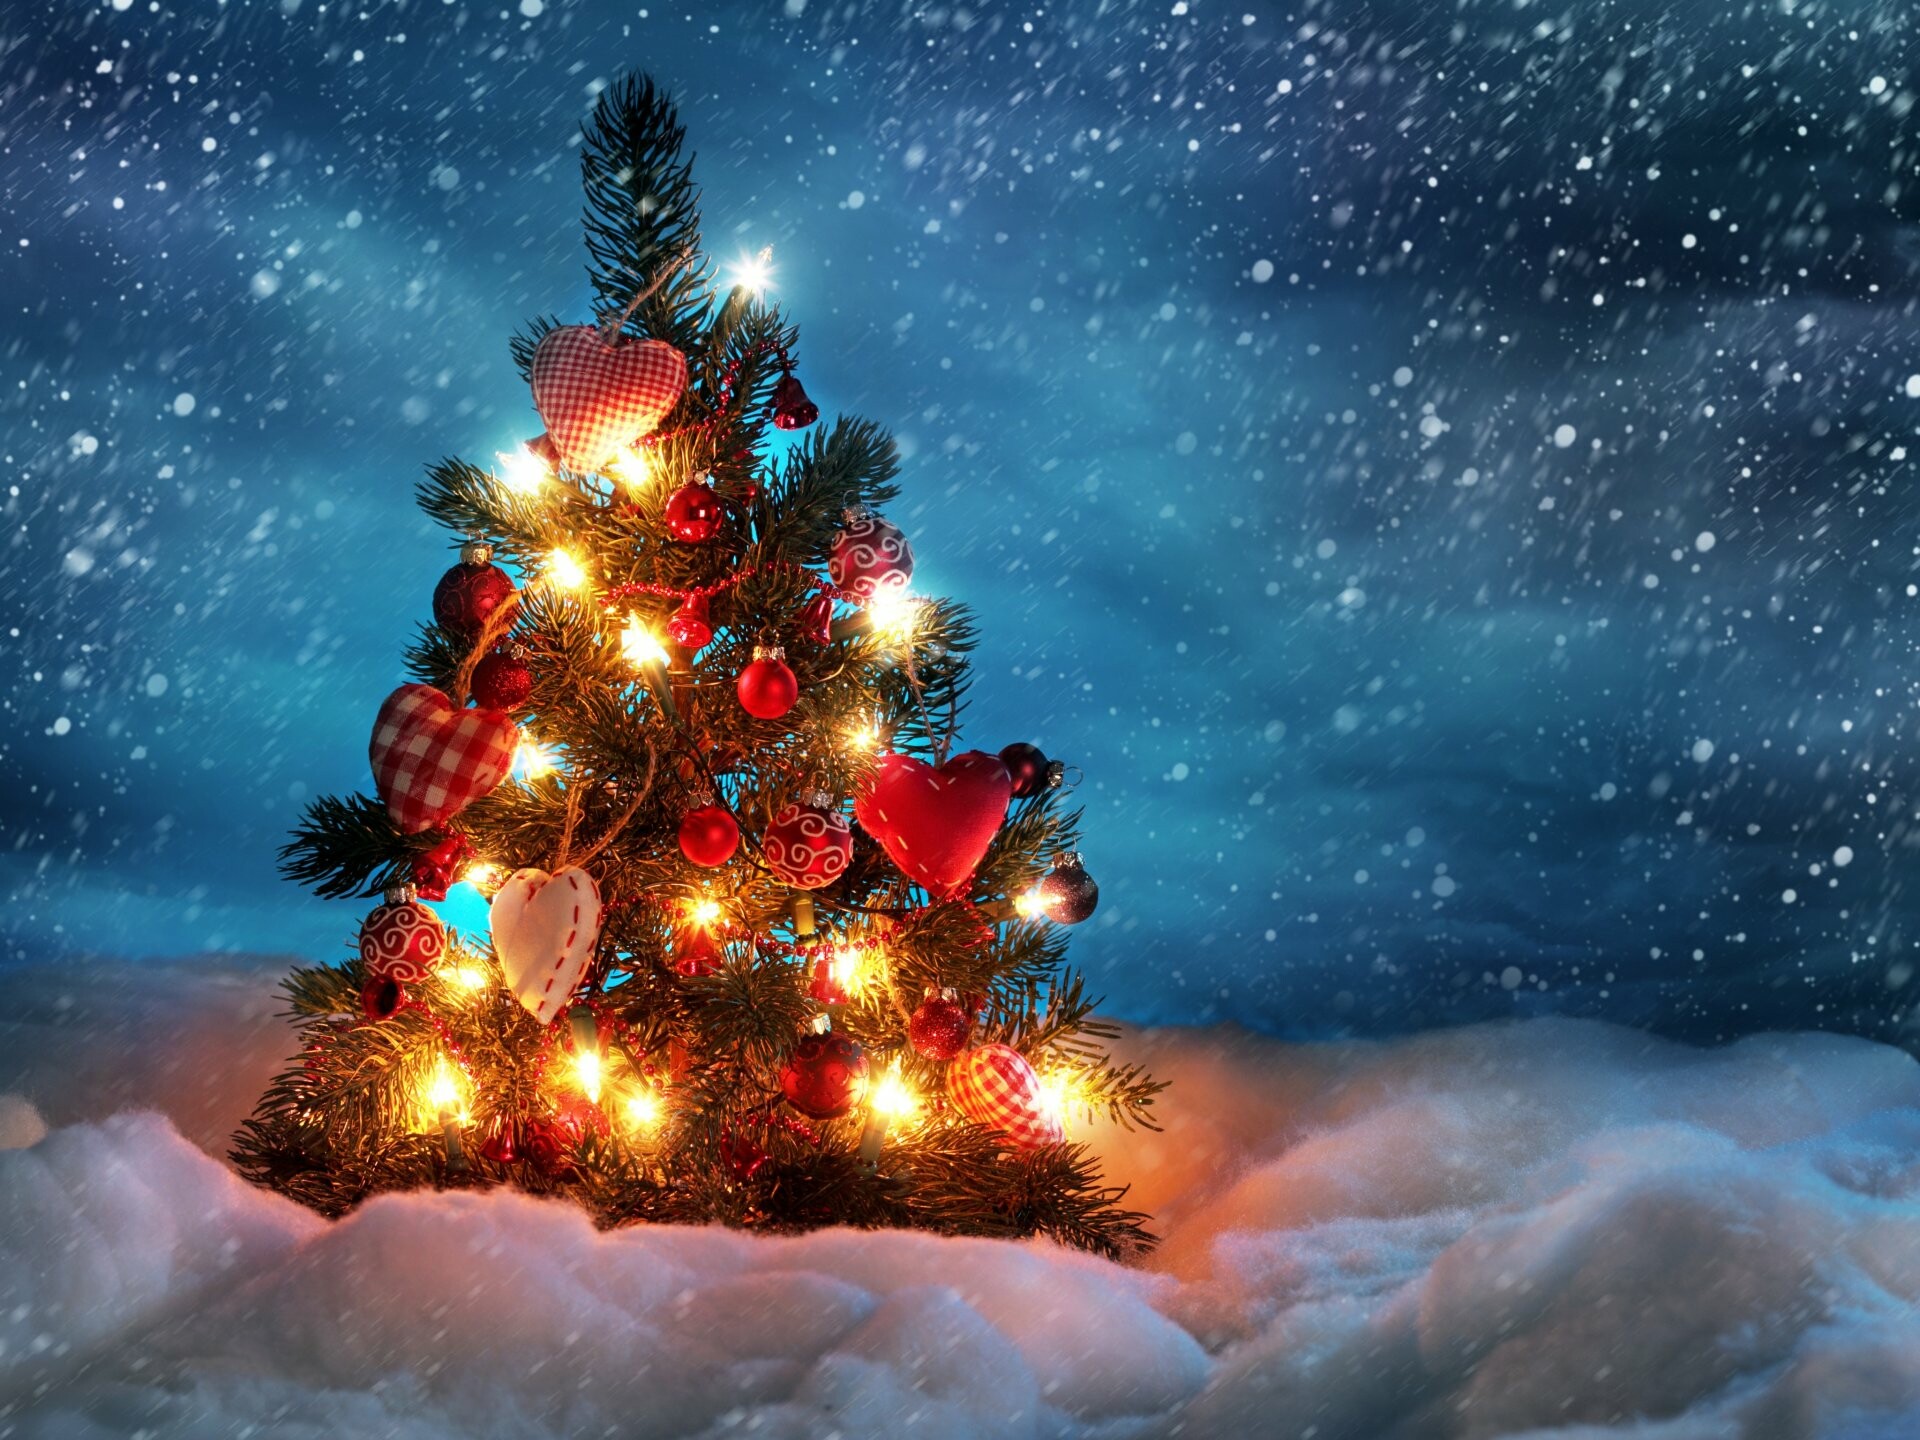 Fairy Lights: A Christmas tree decked out in electric bulbs, Ornament. 1920x1440 HD Background.